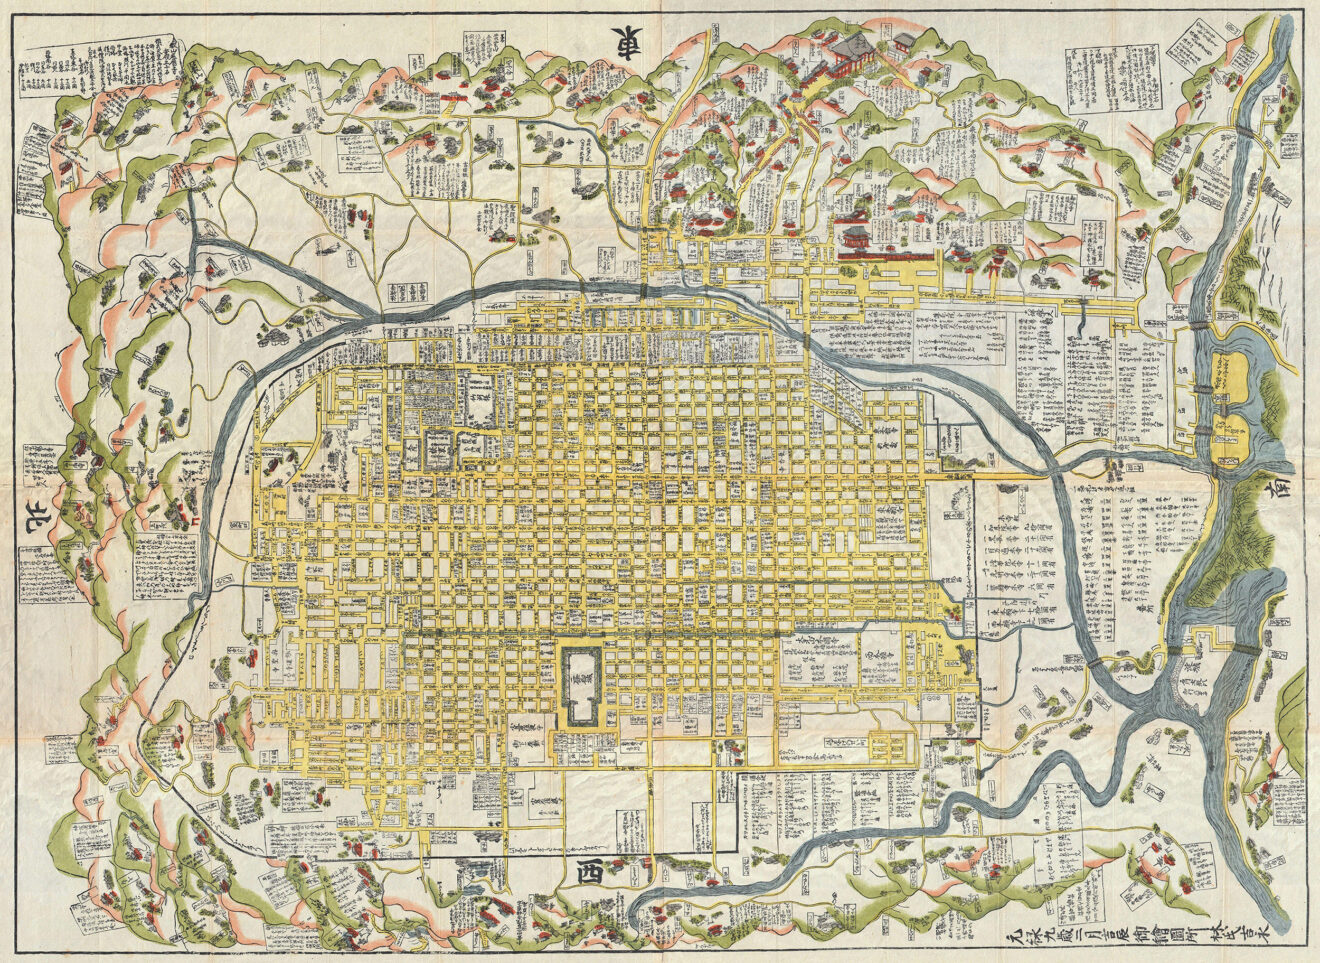 1696_Map_of_Kyoto,Japan_Geographicus Rare Antique Maps_wikimediacommon_topophile